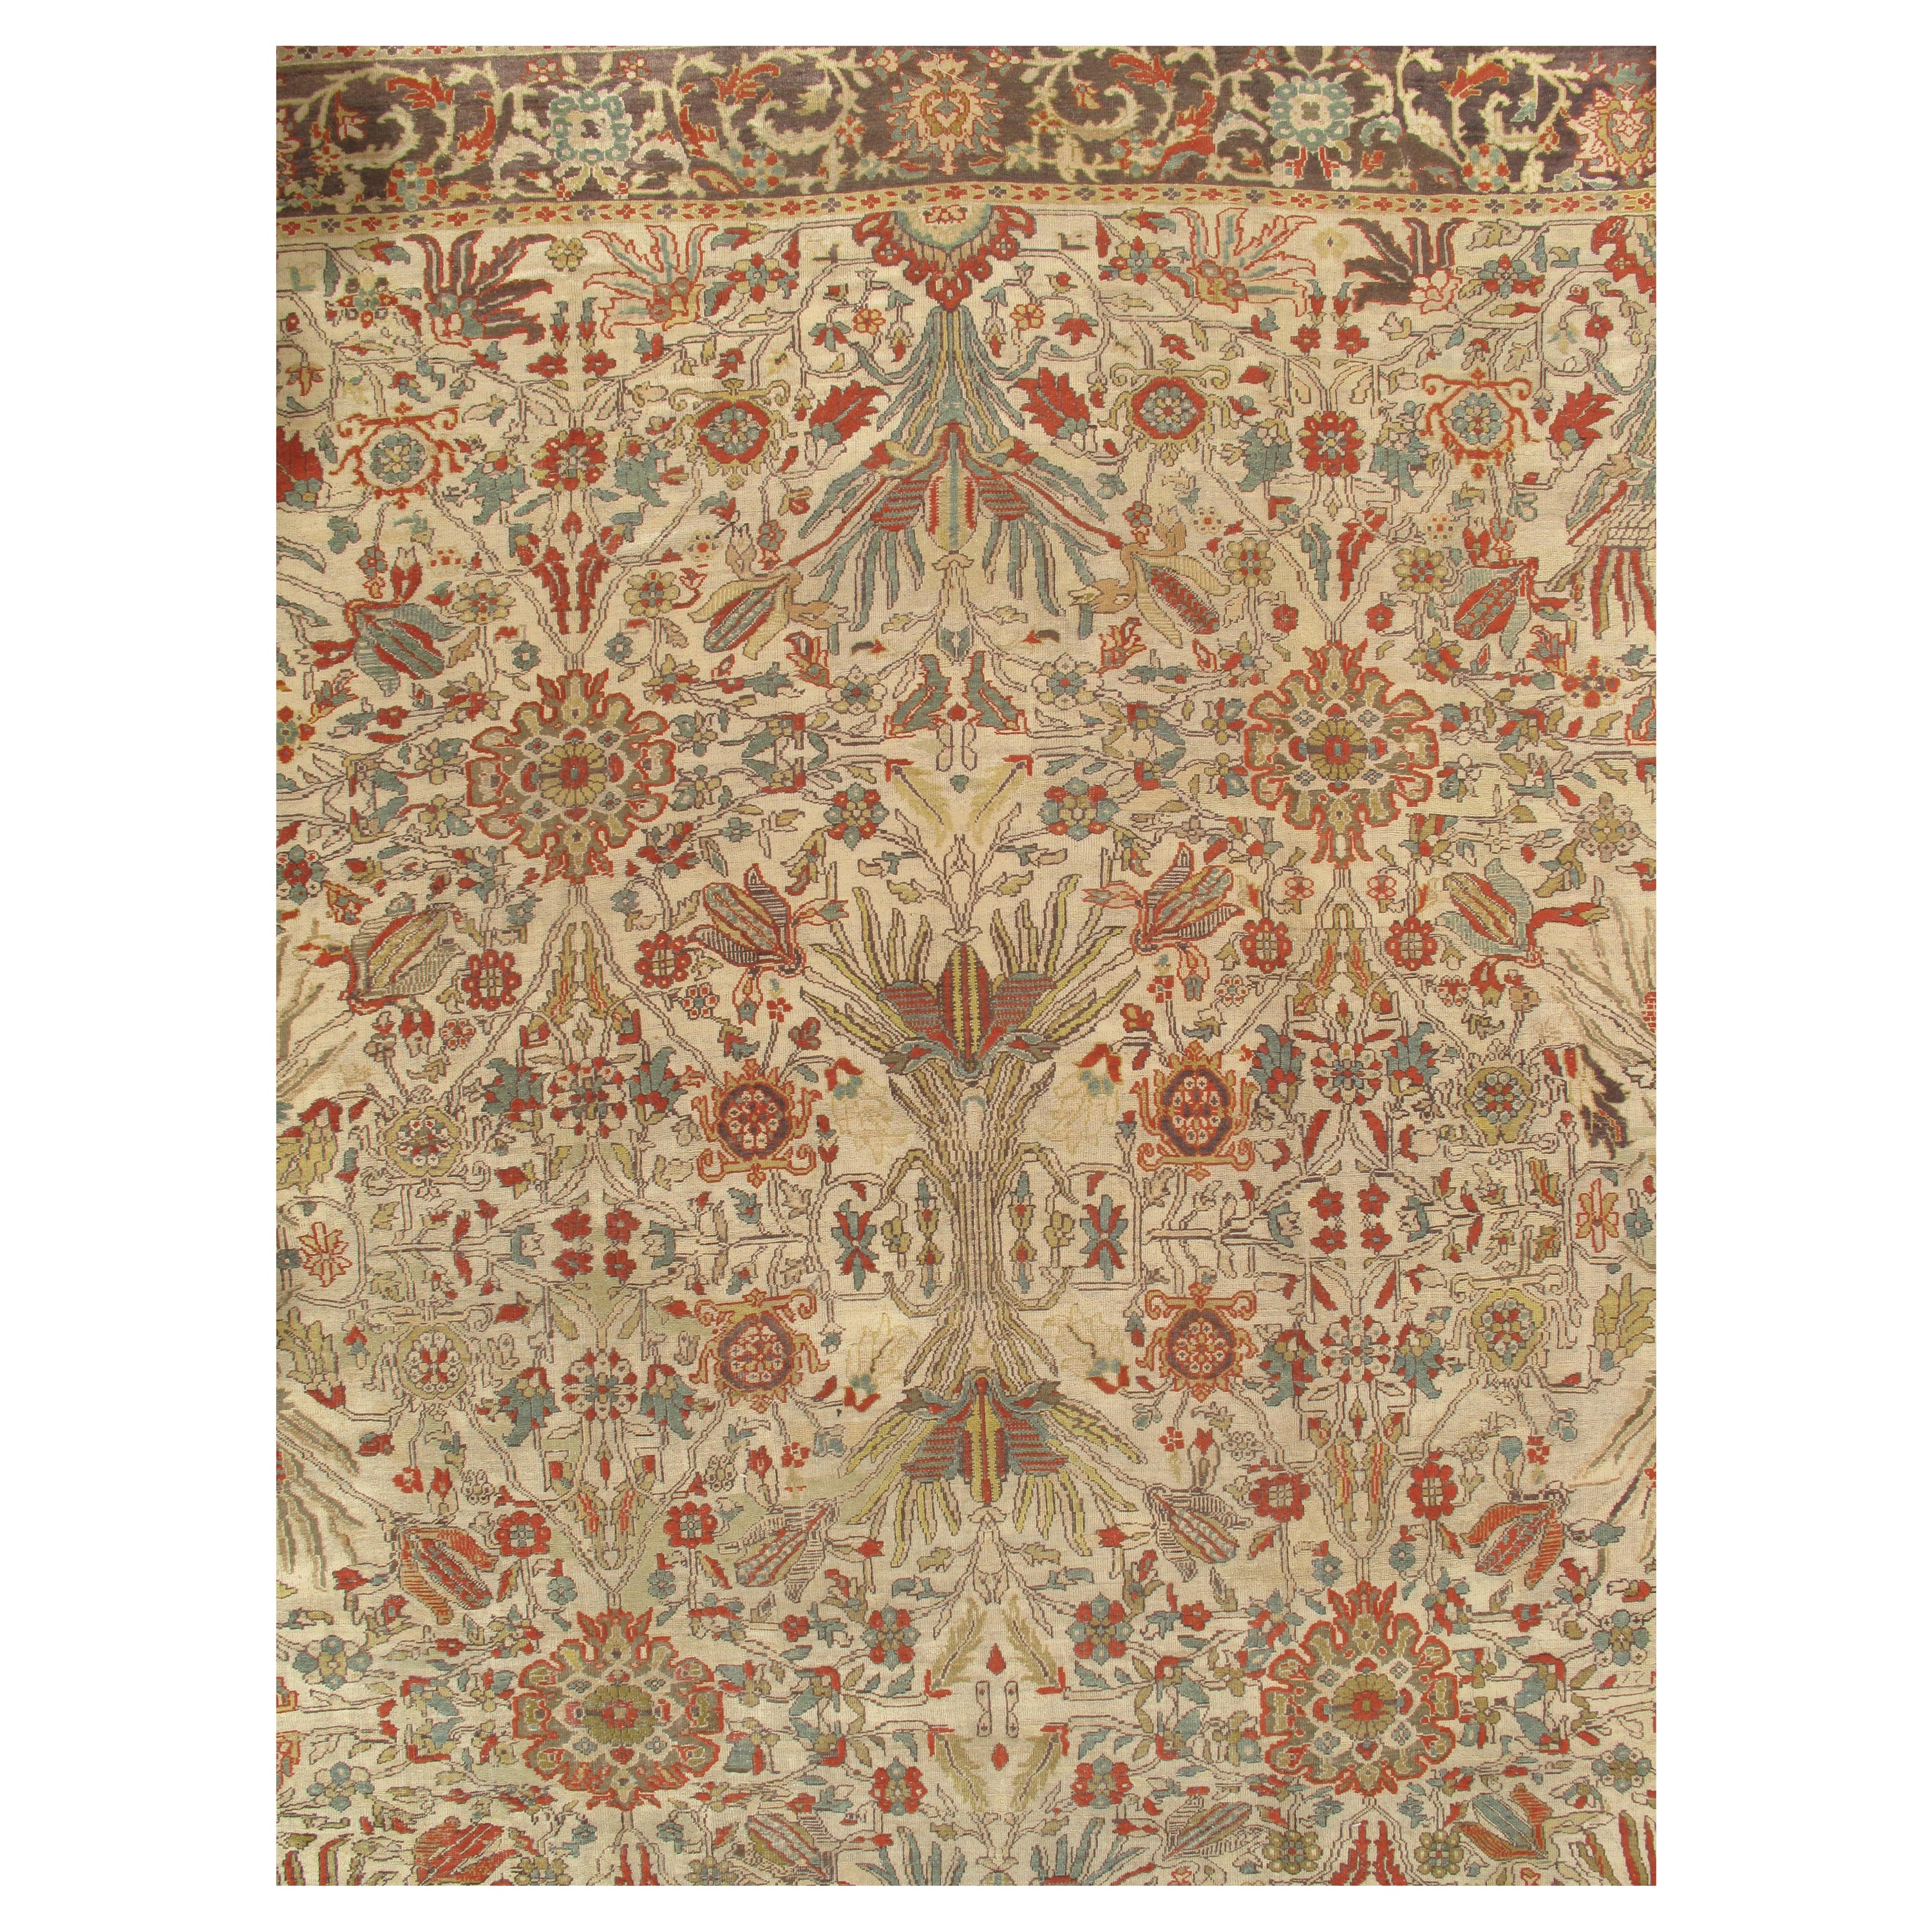 Antique Sultanabad Carpet, Handmade Persian Rug Gray, Light Blue, Green Soft Red For Sale